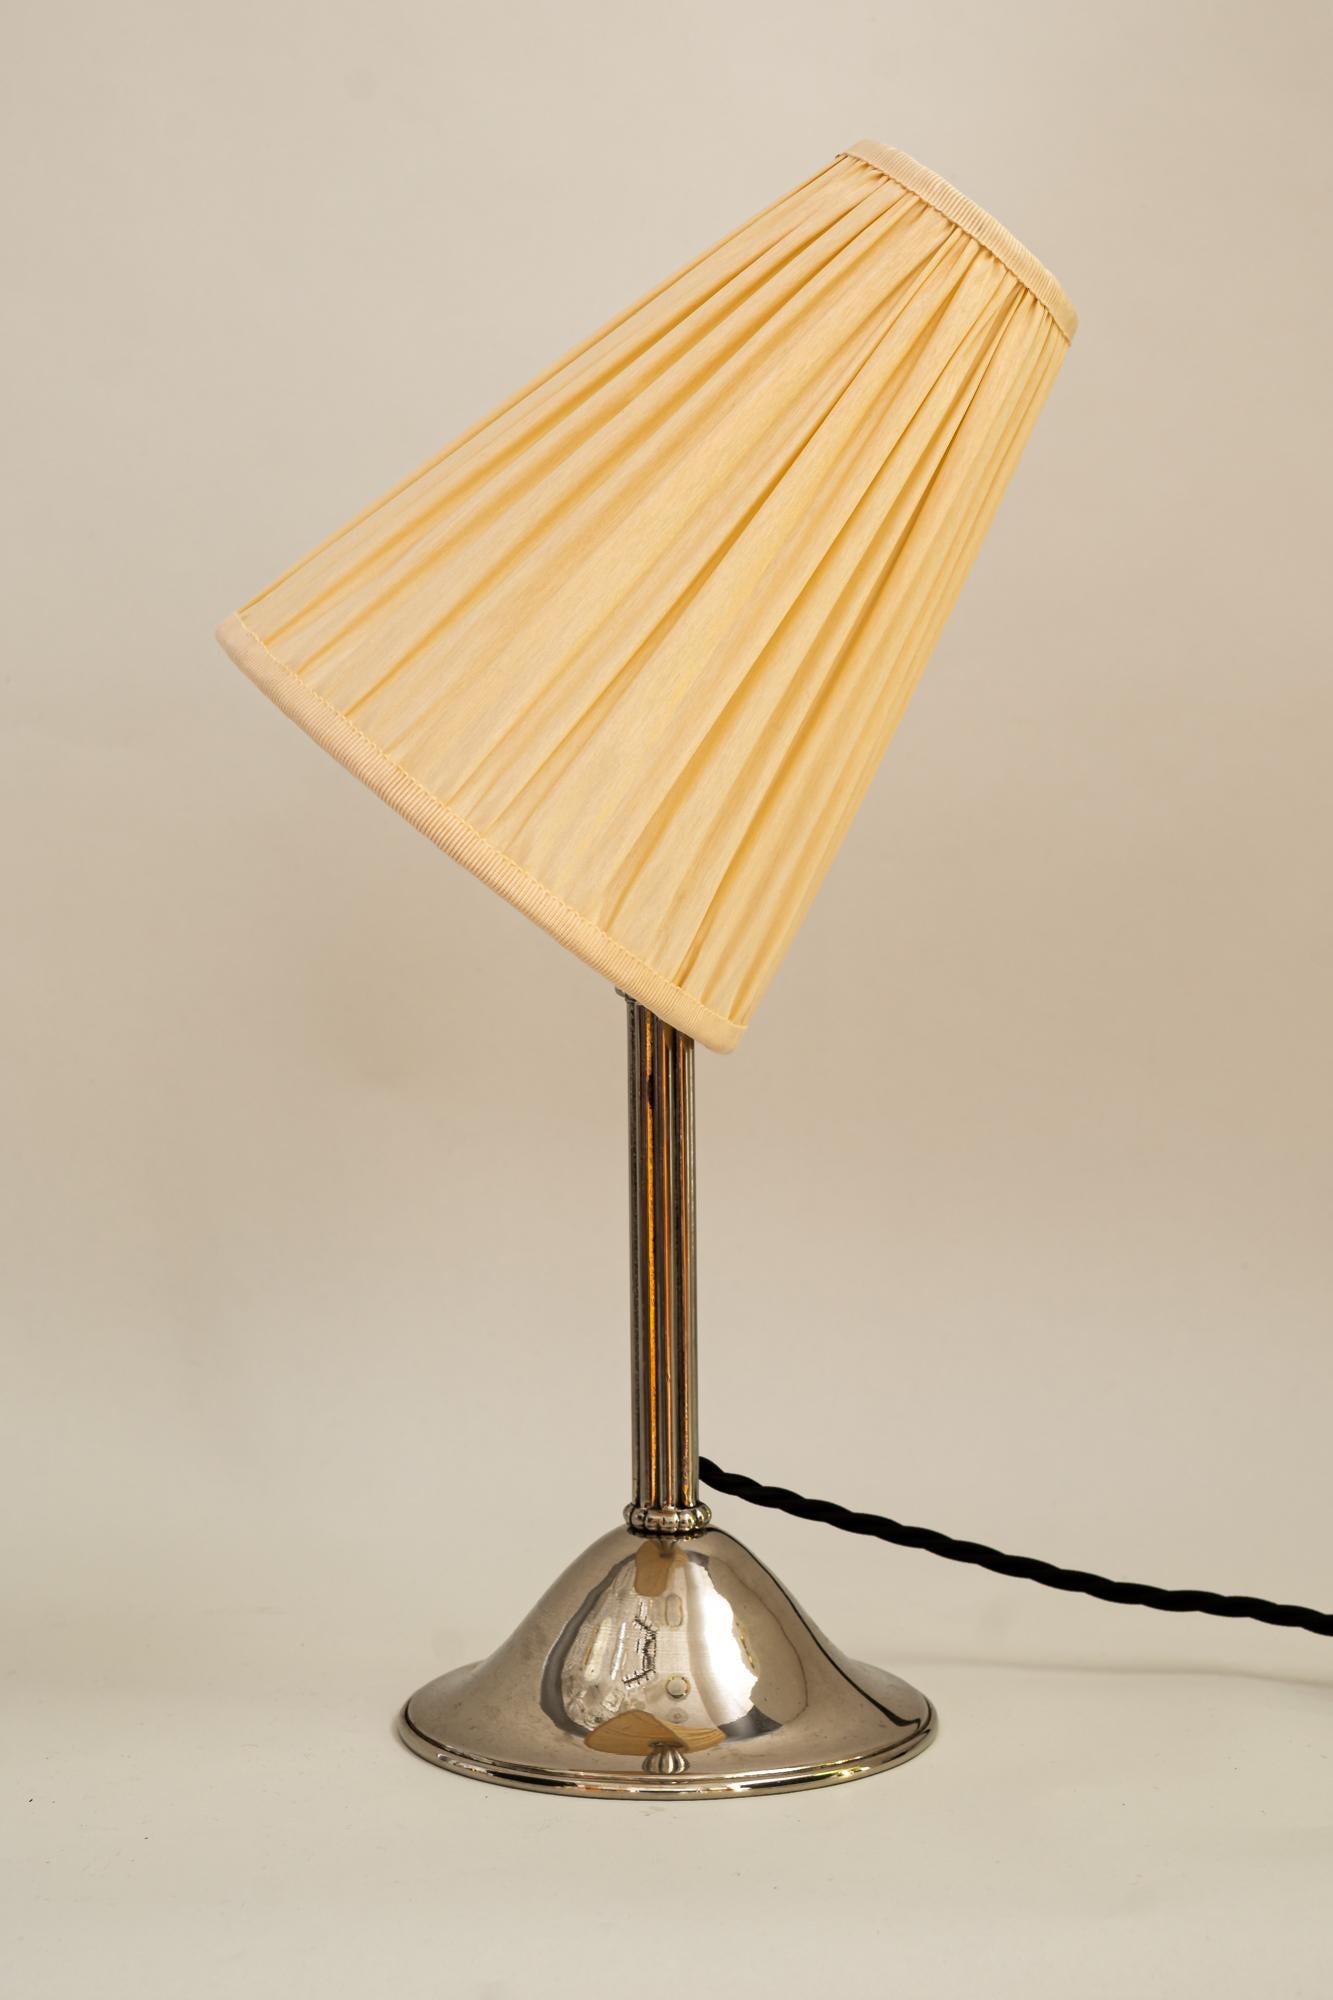 Nickel - plated art deco table lamp with fabric shade around 1920s
Original condition
The shade is replaced (new).